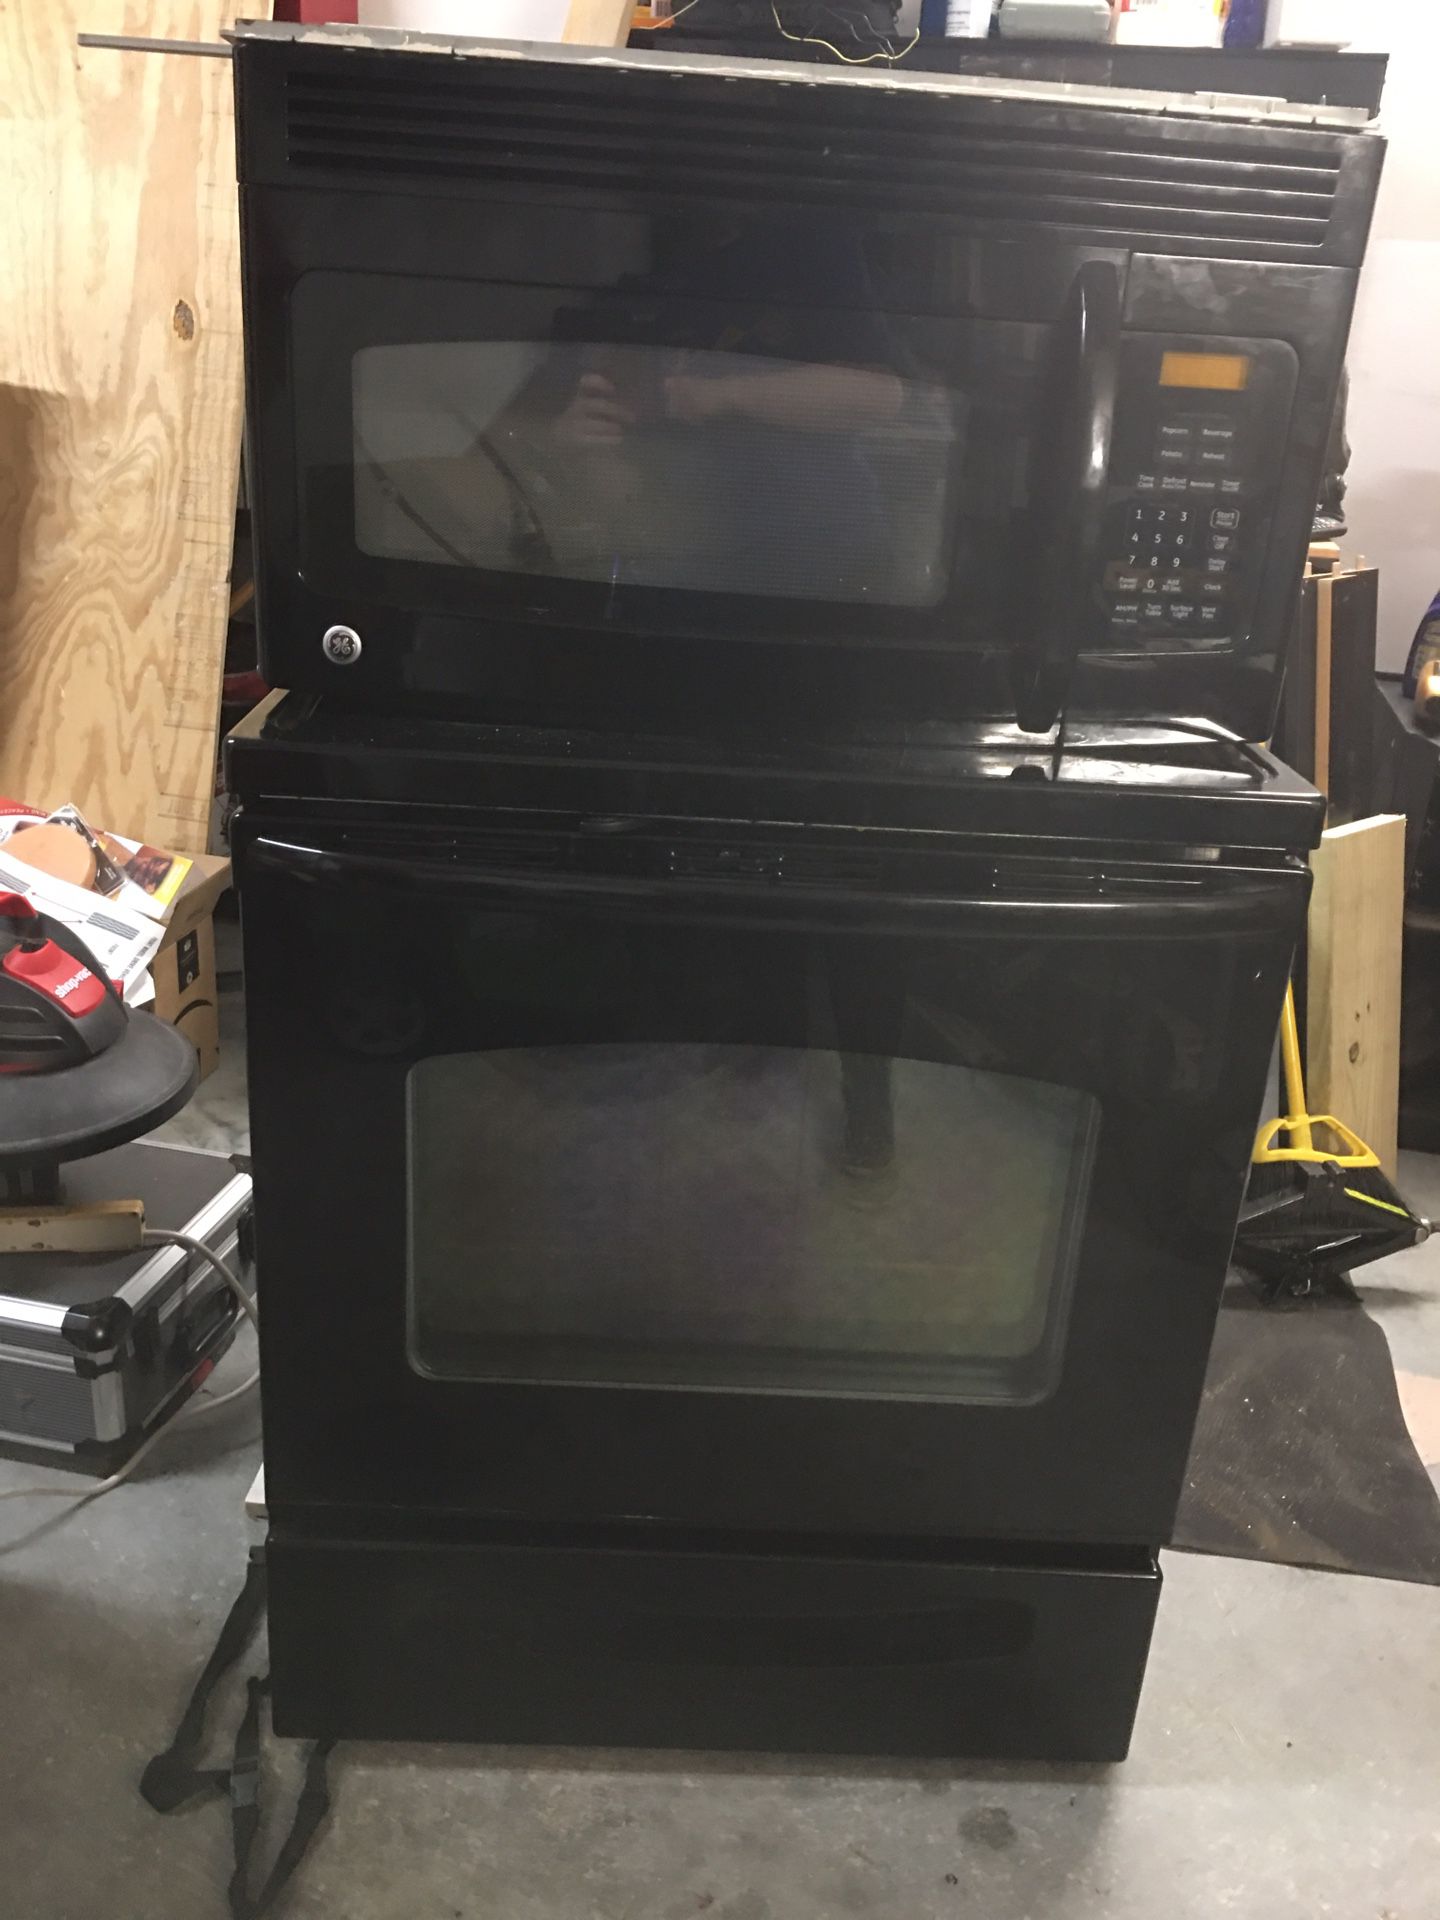 GE Appliances - Stove and Microwave